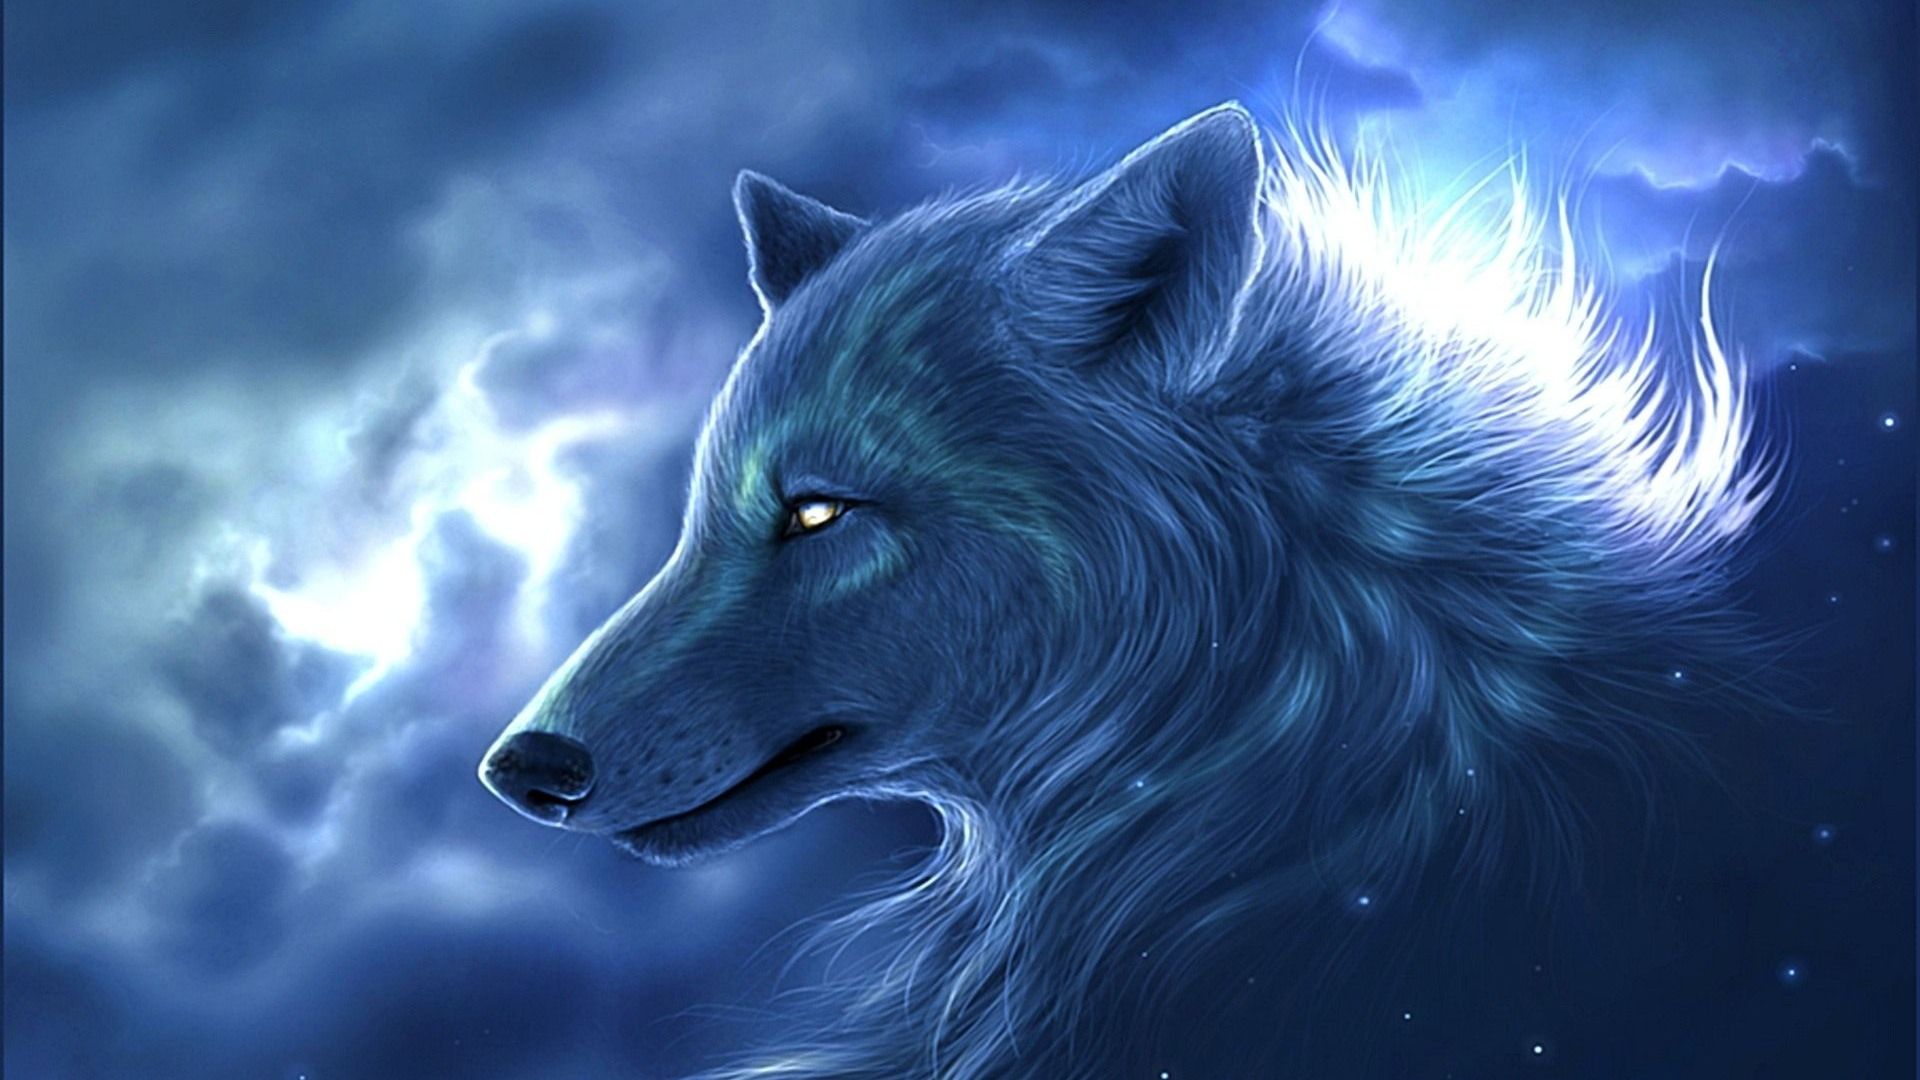 Free download Spirit Wolf Wallpapers Top Spirit Wolf Backgrounds.